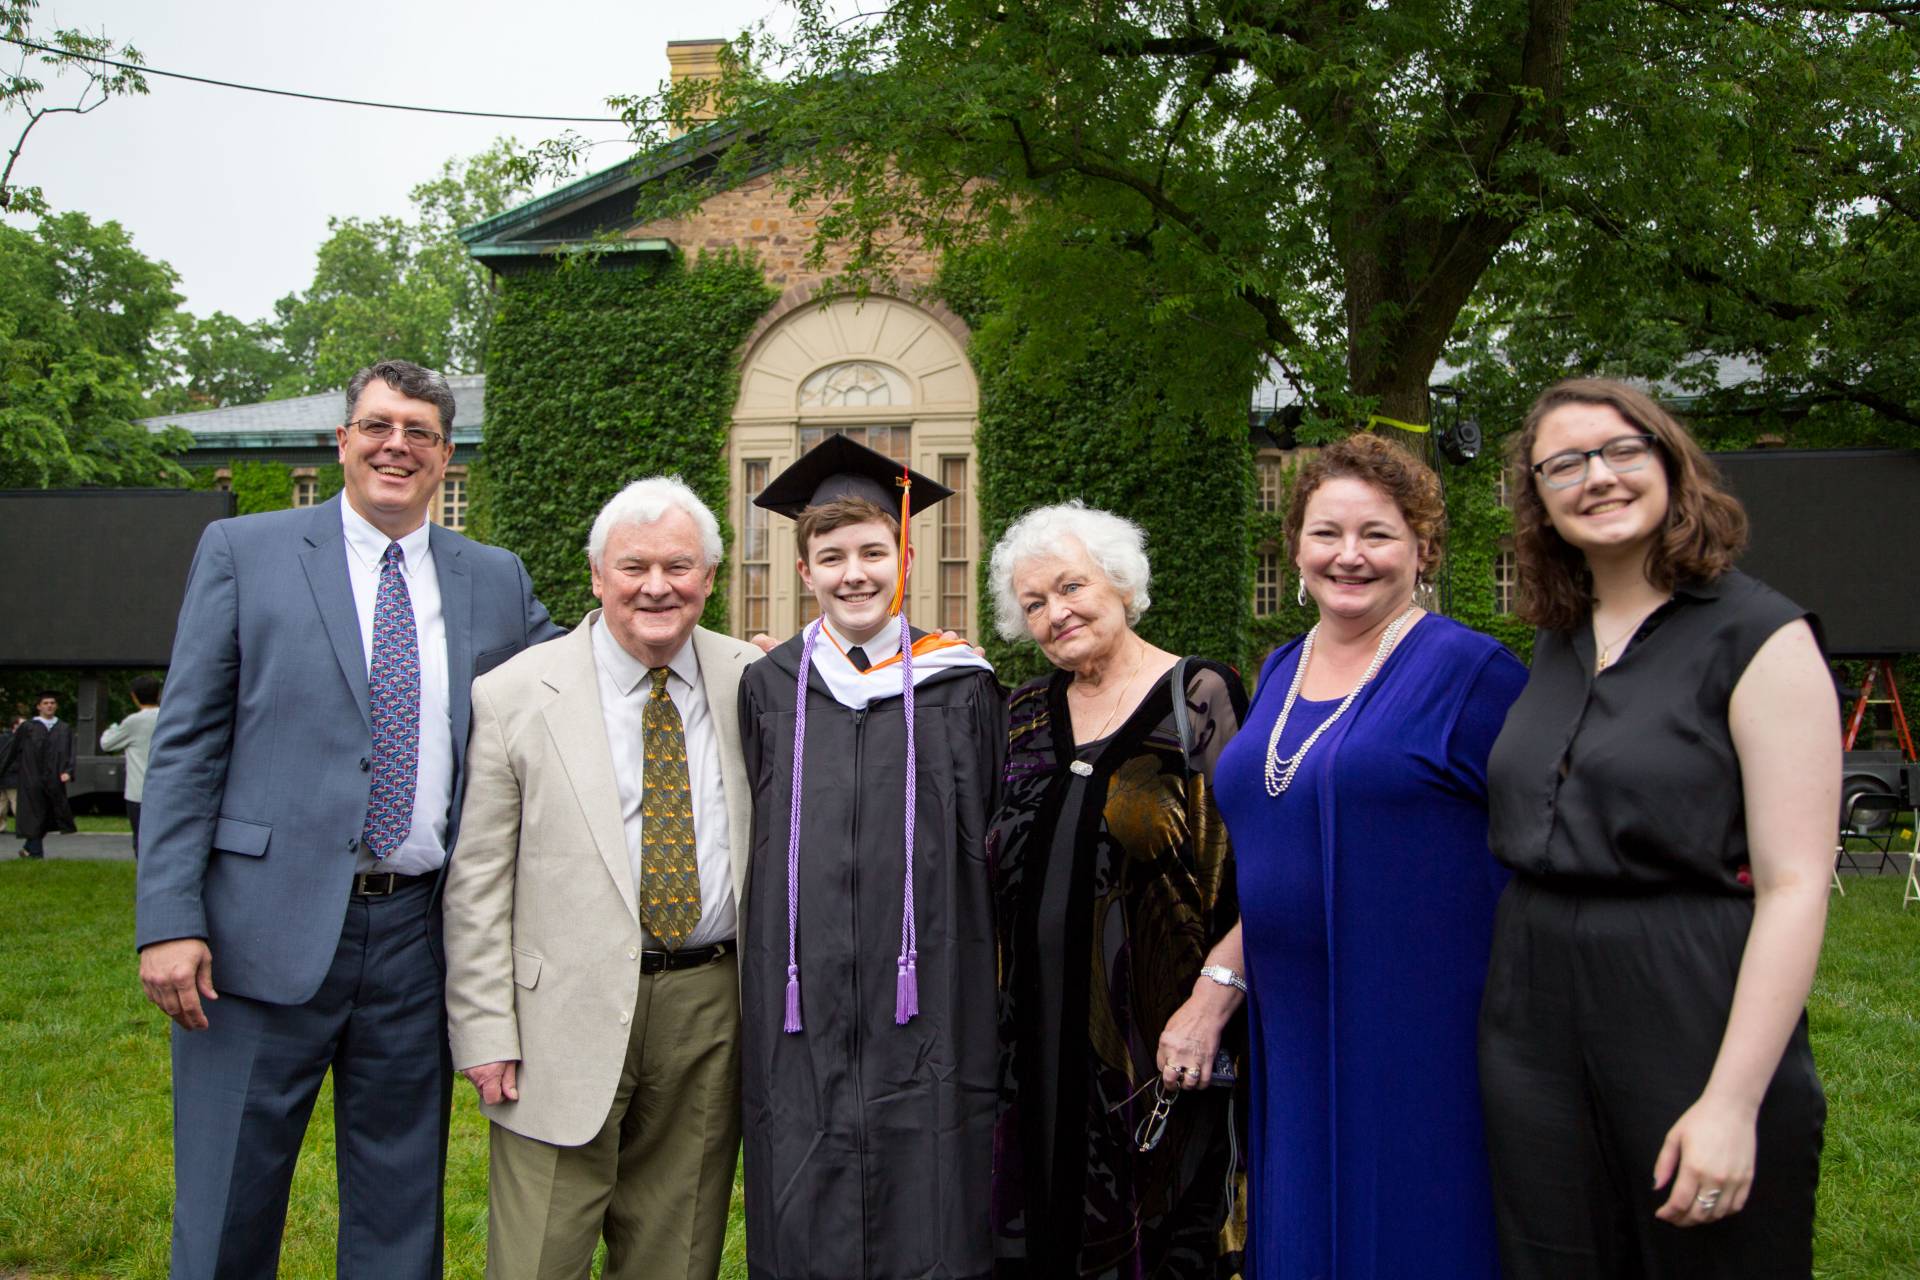 Christopher Snider with family after Commencement 2017 ceremony